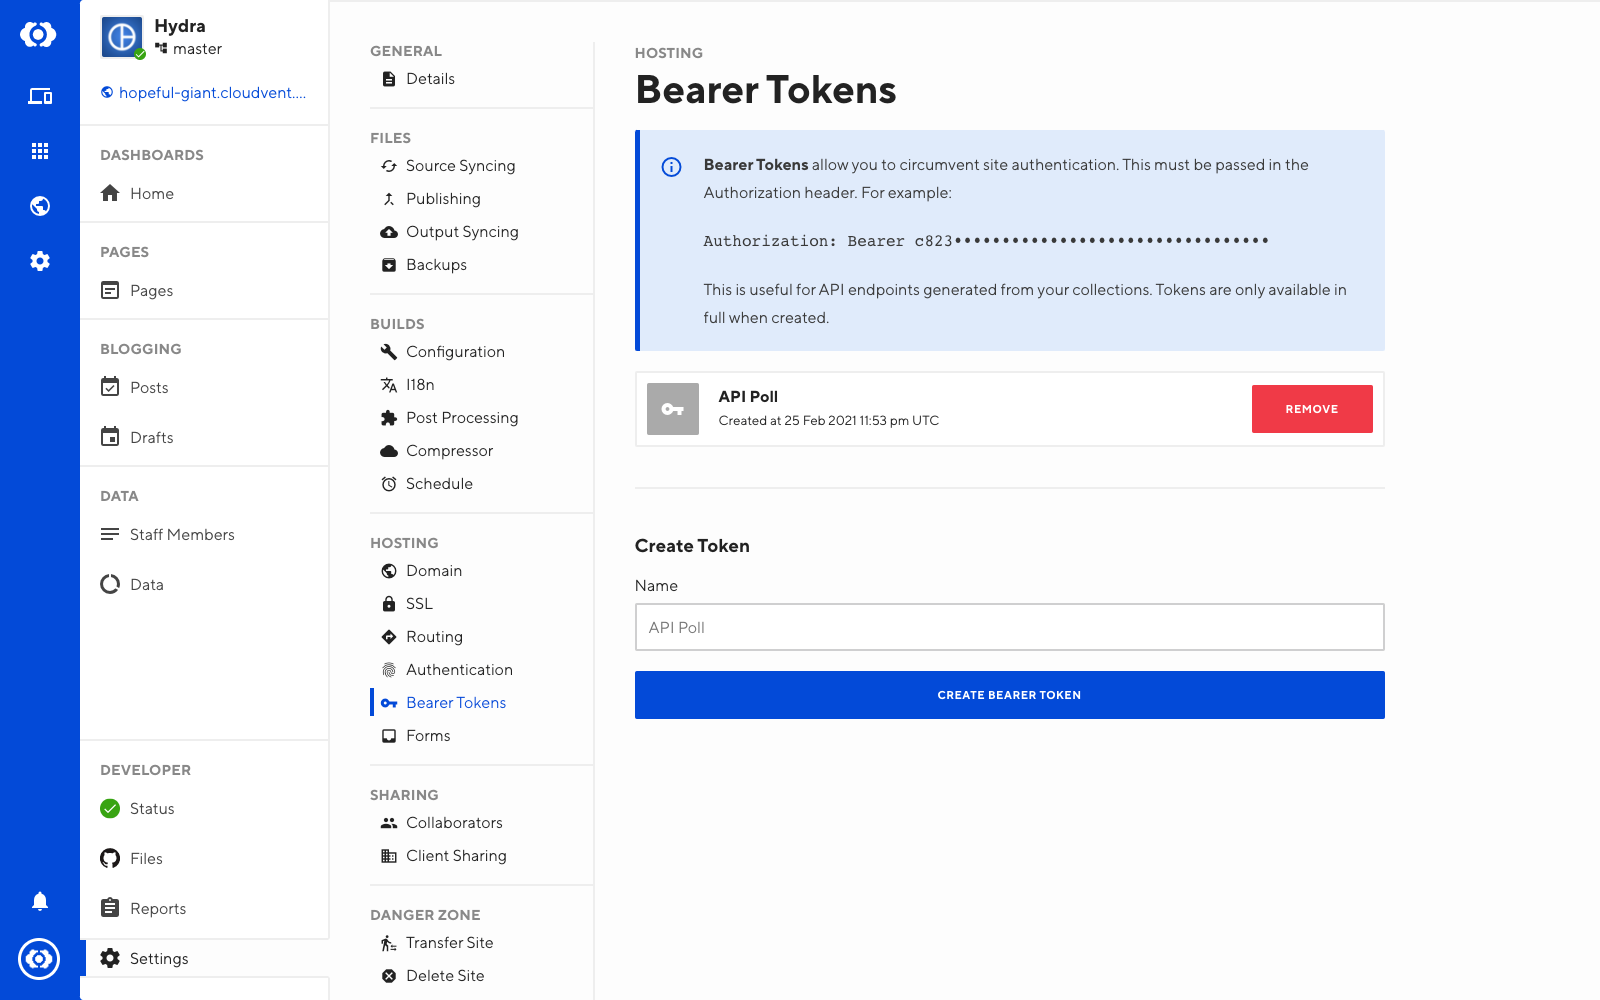 What is Bearer Token (An Ultimate Guide)